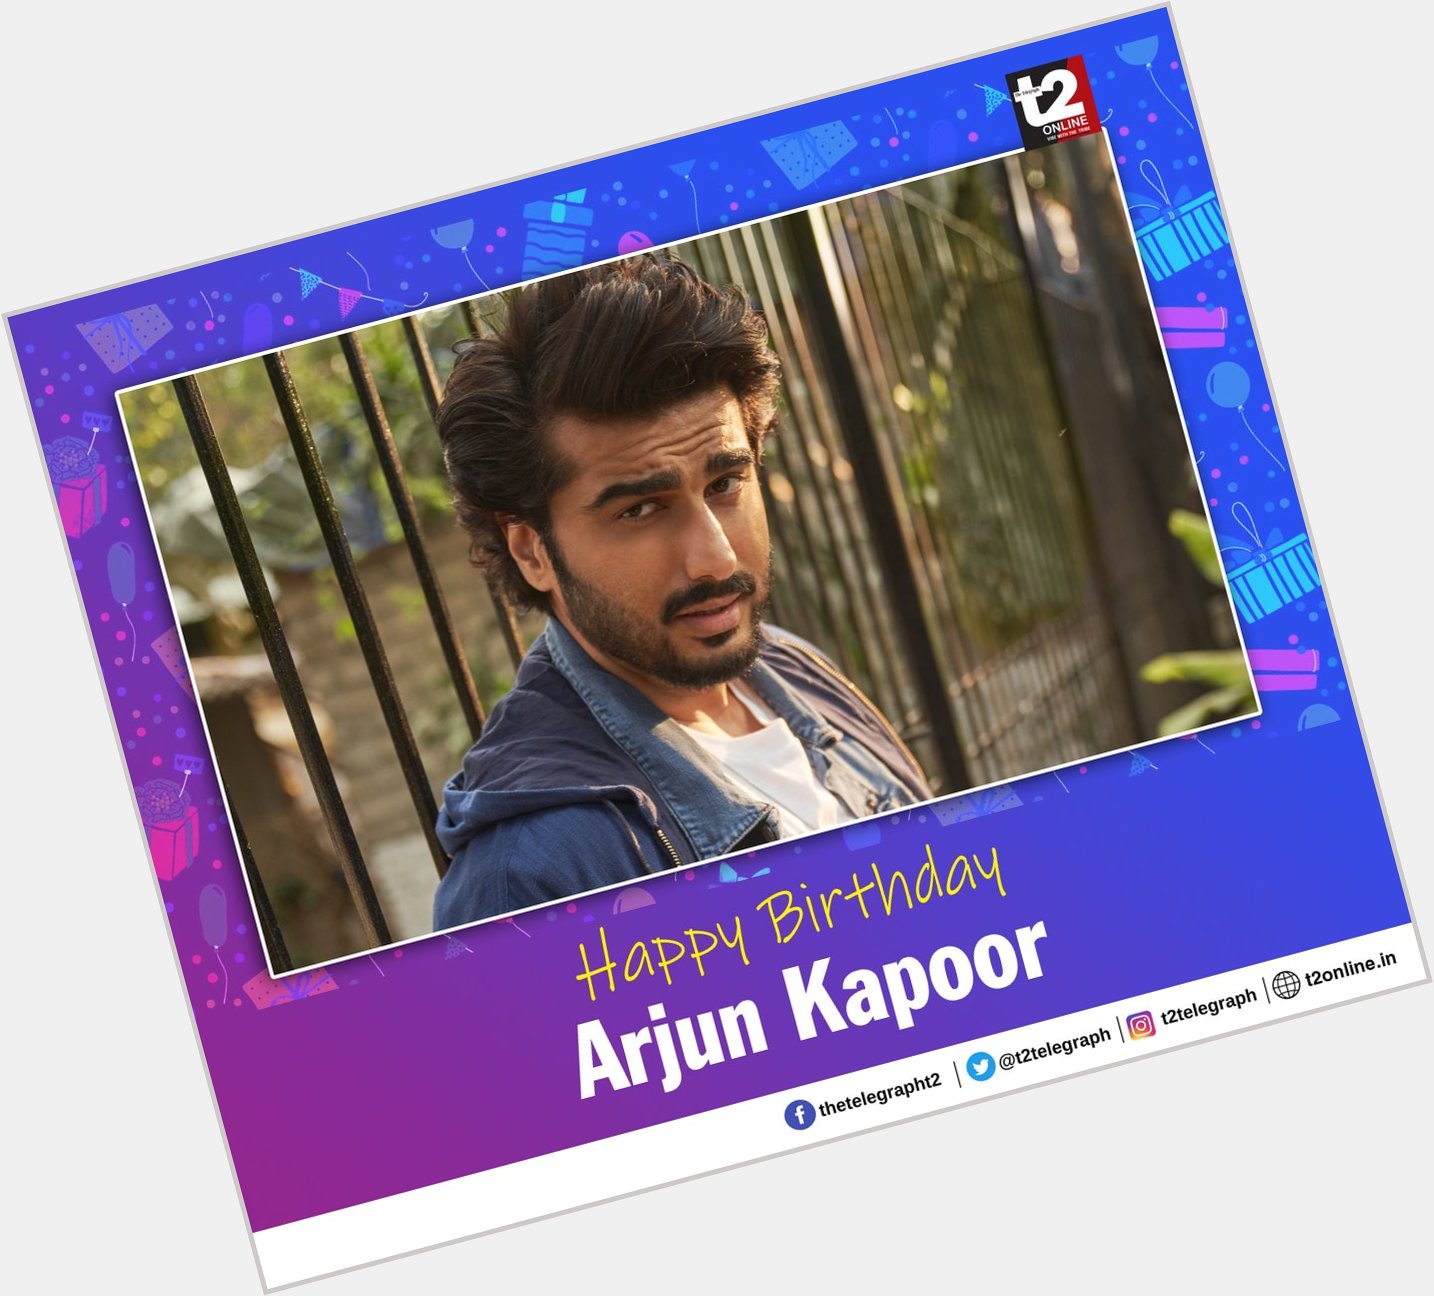 T2 wishes the fun and fab Arjun Kapoor a very happy birthday 